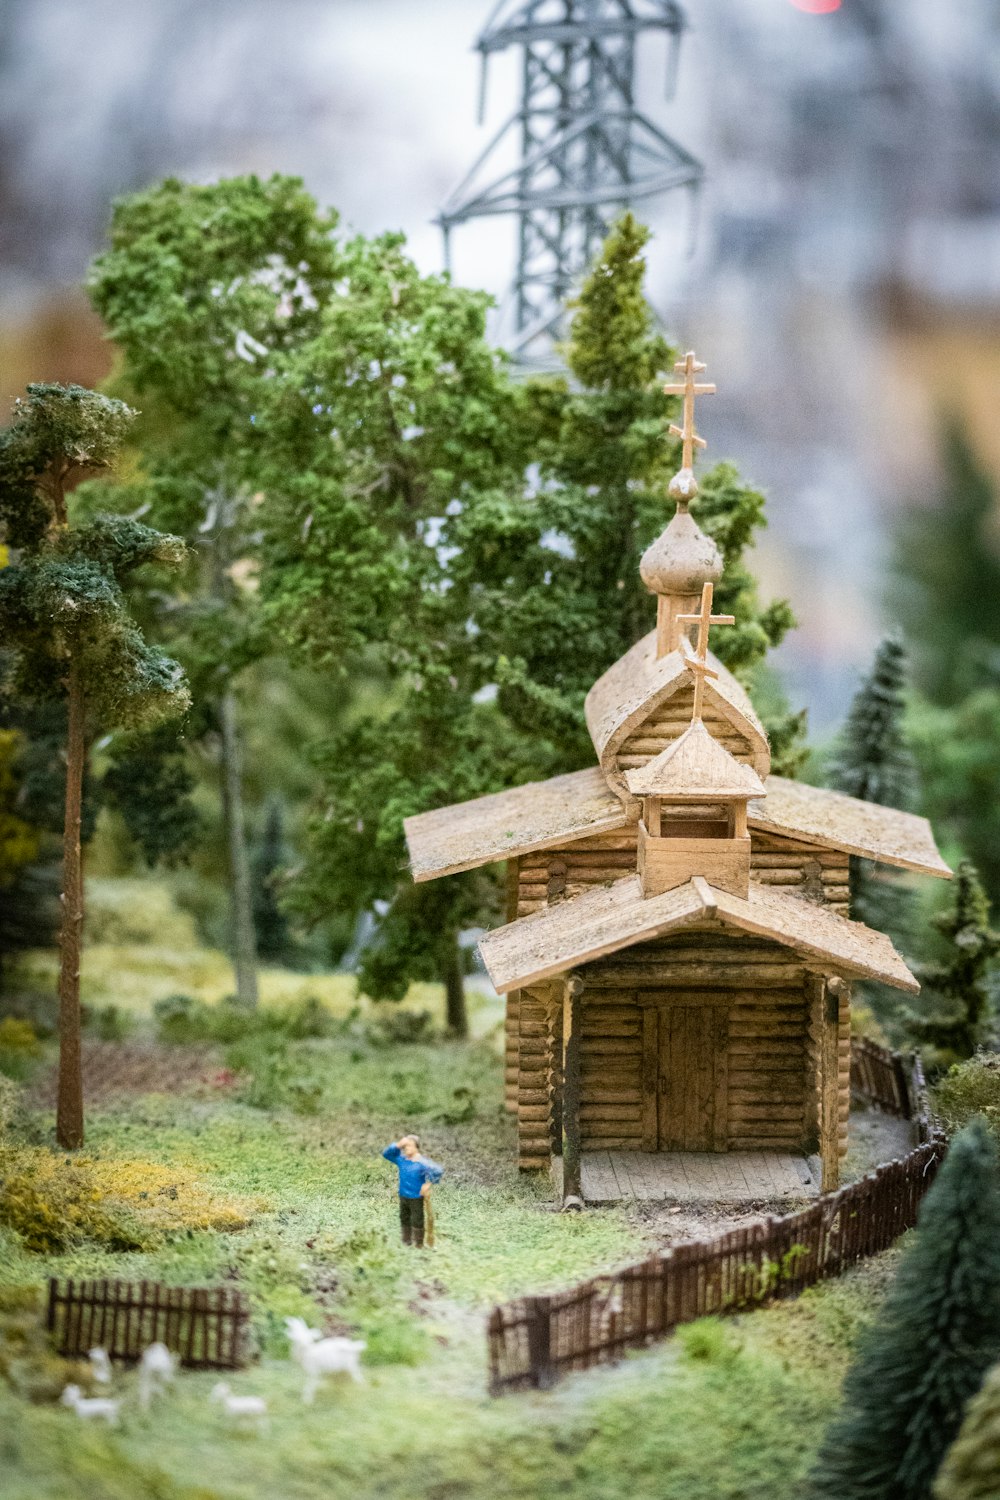 a miniature model of a small wooden church